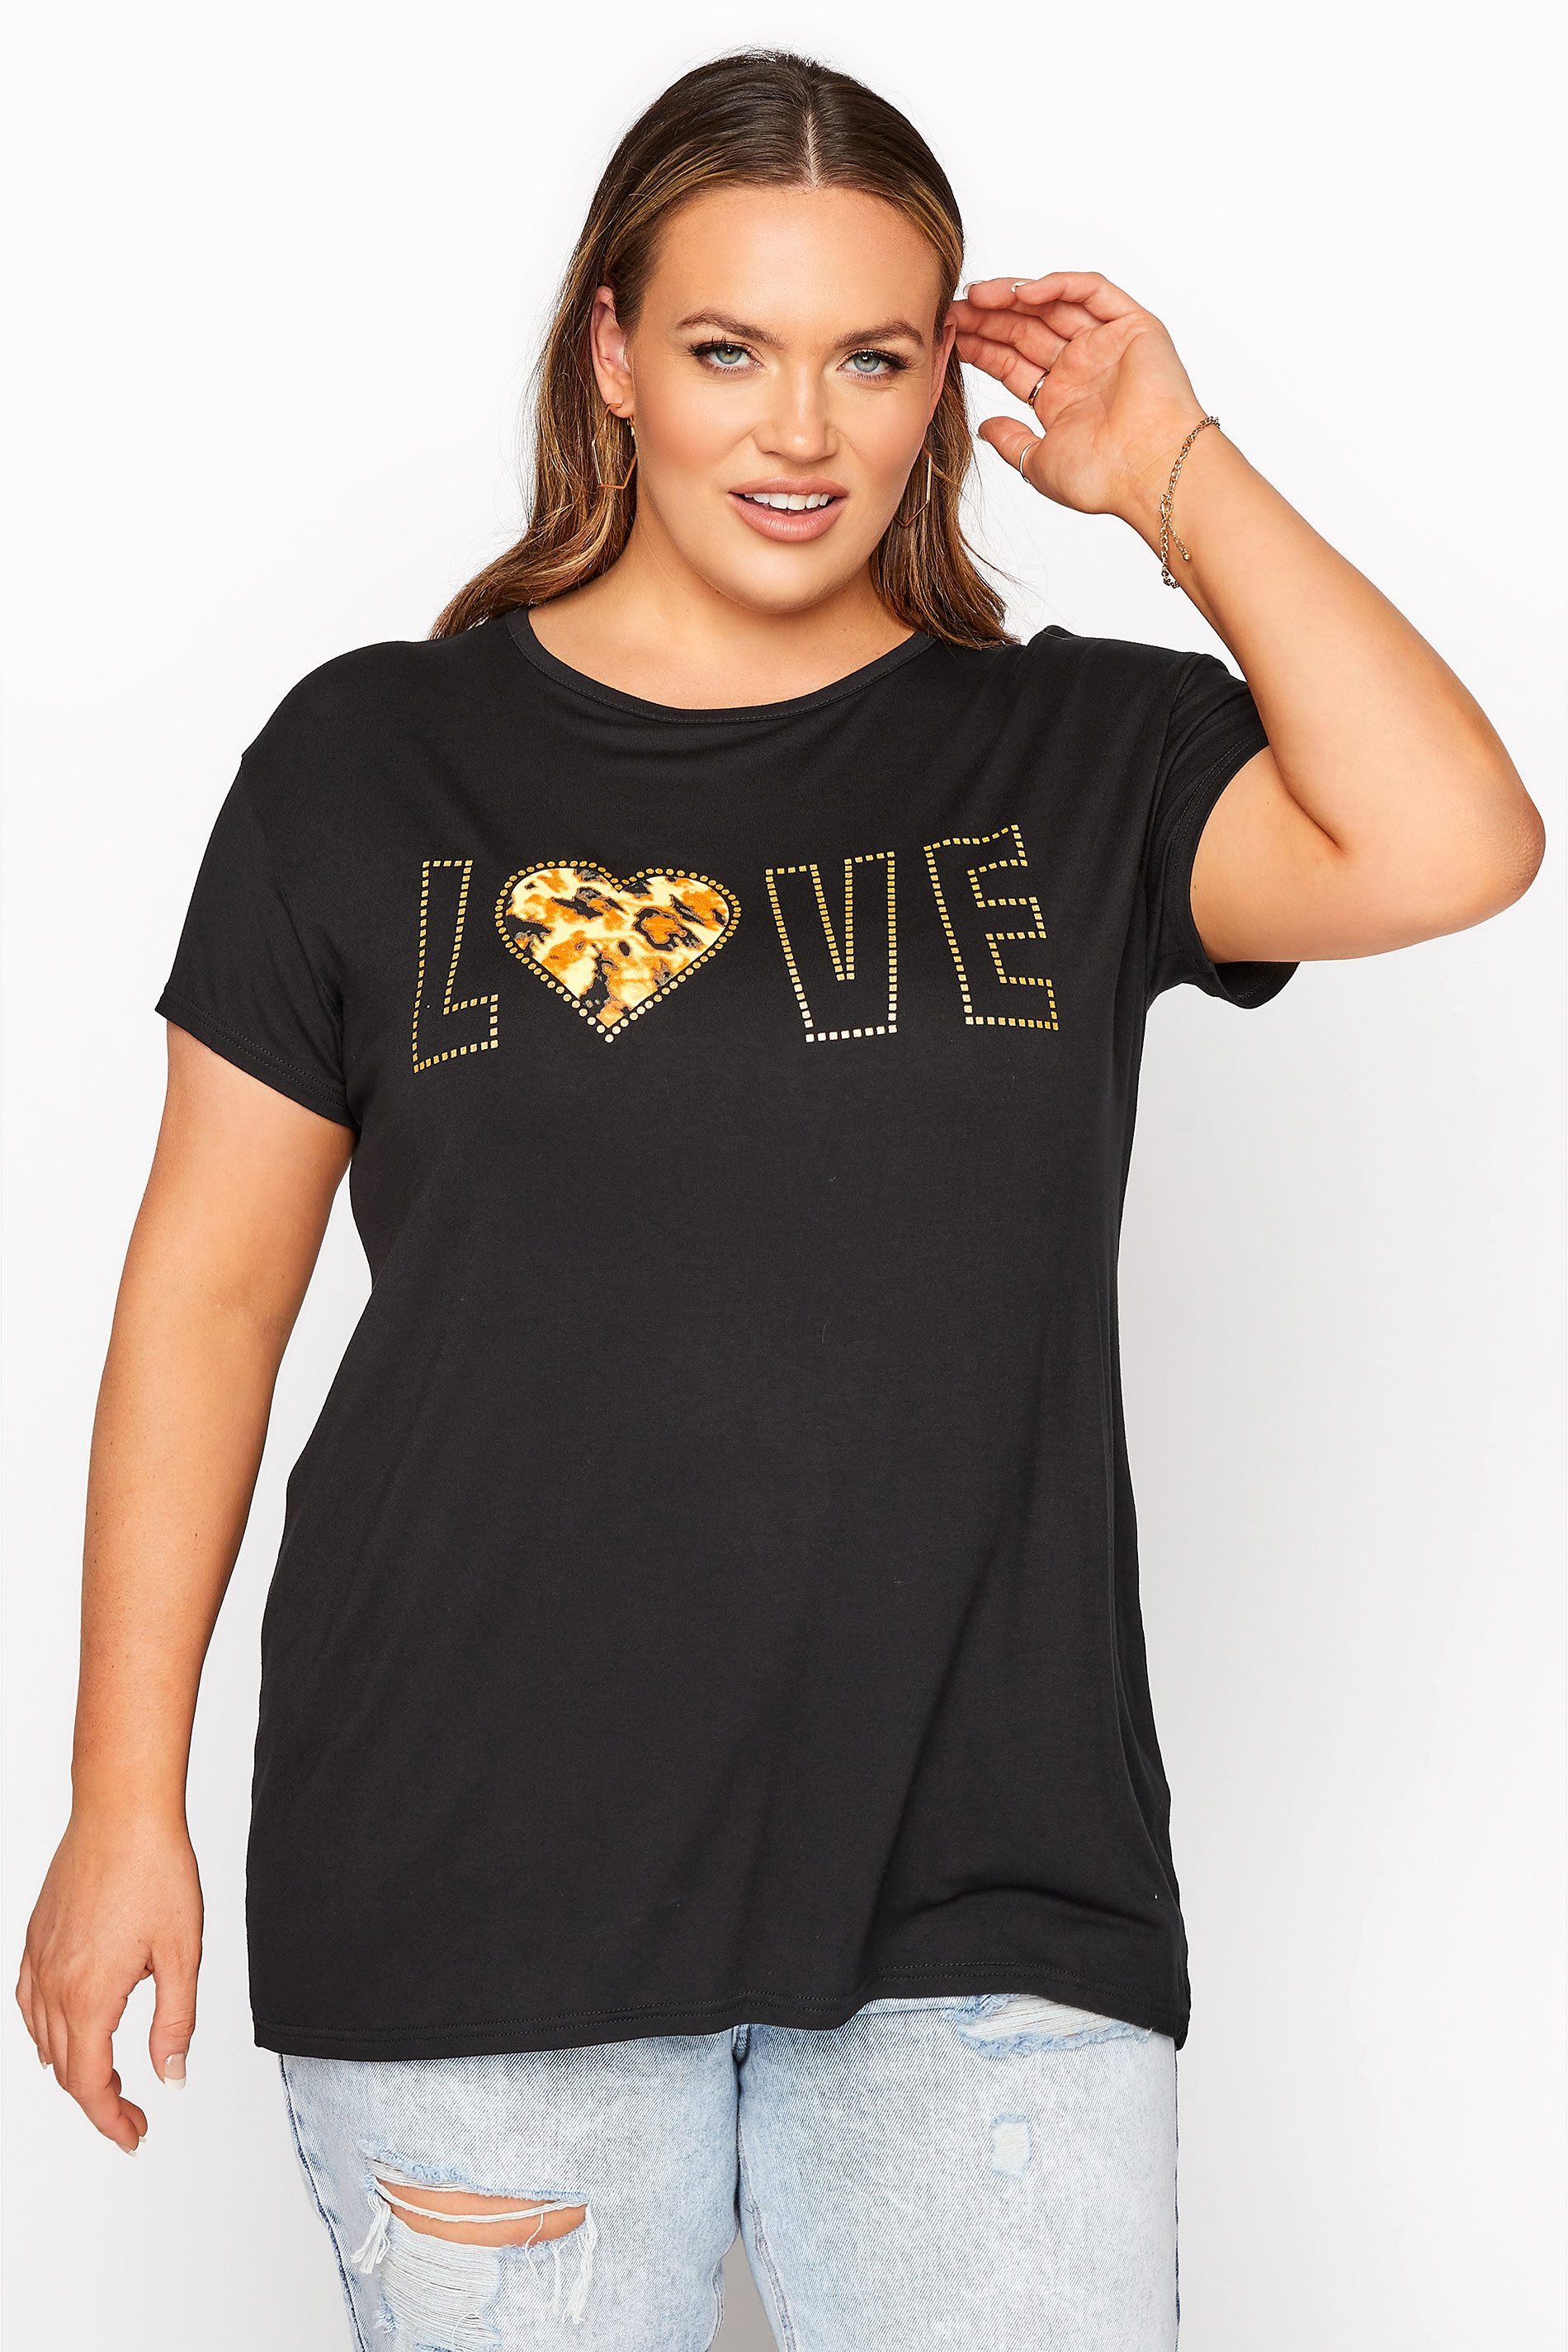 Grande taille  Tops Grande taille  T-Shirts | LIMITED COLLECTION - T-Shirt Noir 'Love' Animal - EN53124